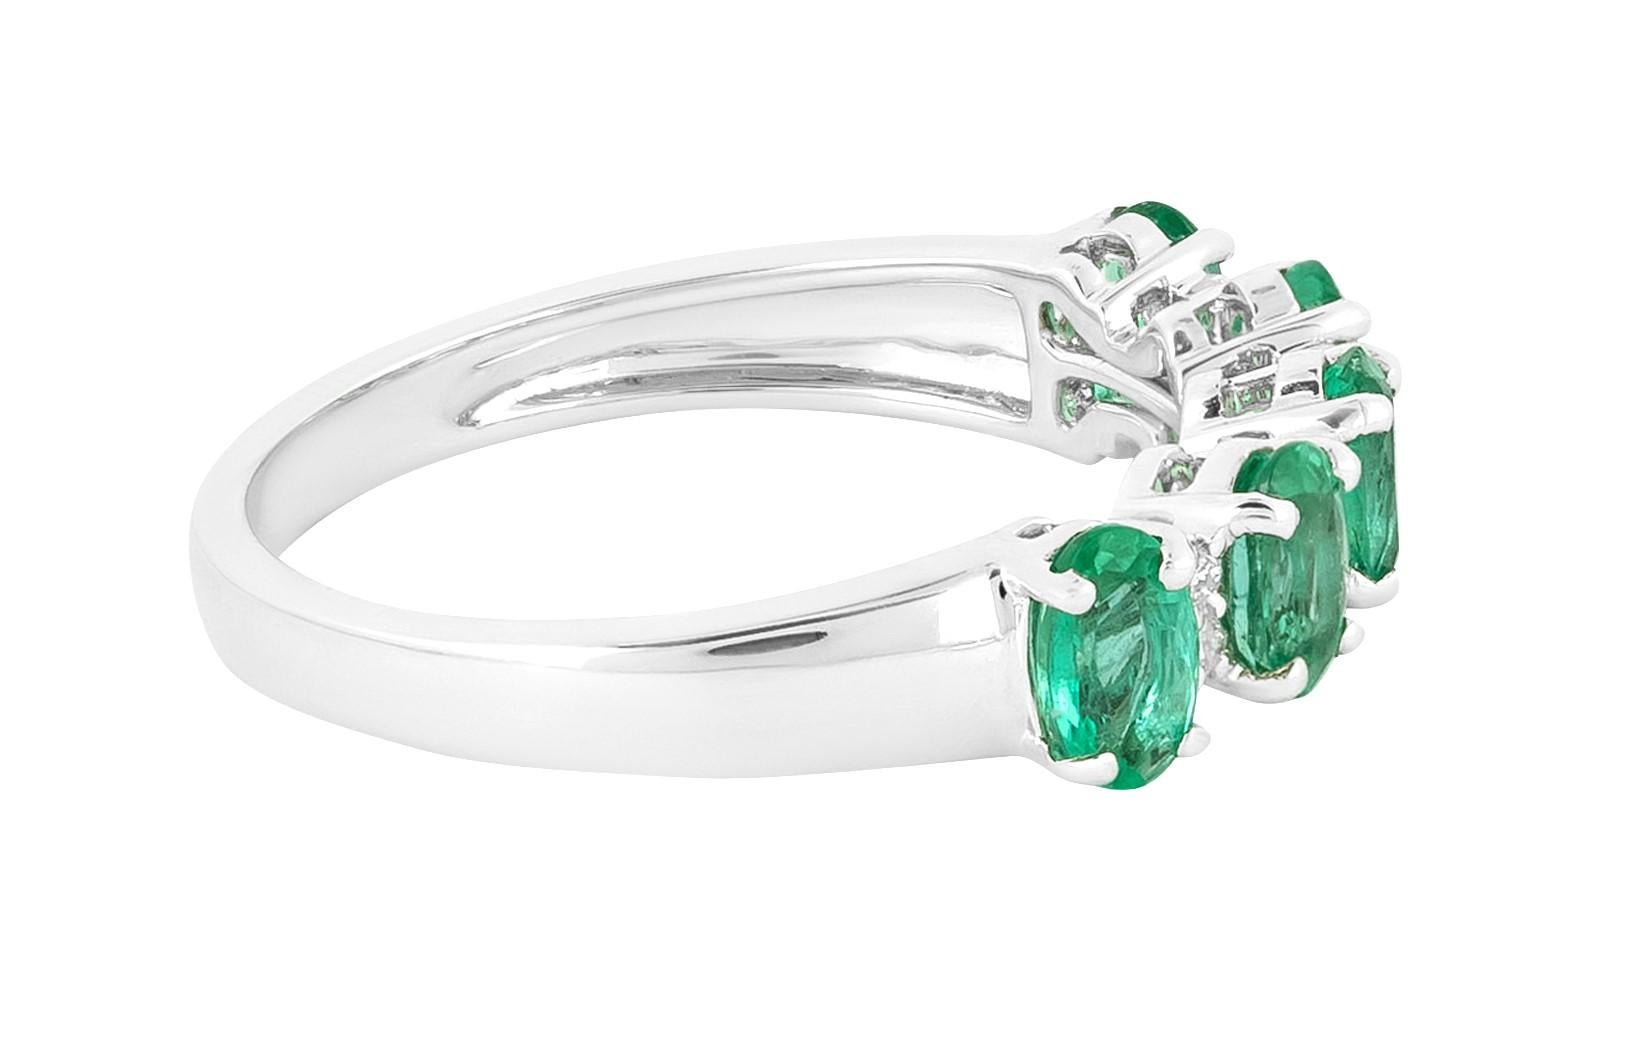 Crafted with unparalleled artistry, the 18 Karat Gold 1.13 Carat Diamond and Emerald Cluster Statement Ring stands as a captivating testament to refined elegance. This exquisite ring merges the sparkling allure of diamonds with the verdant allure of